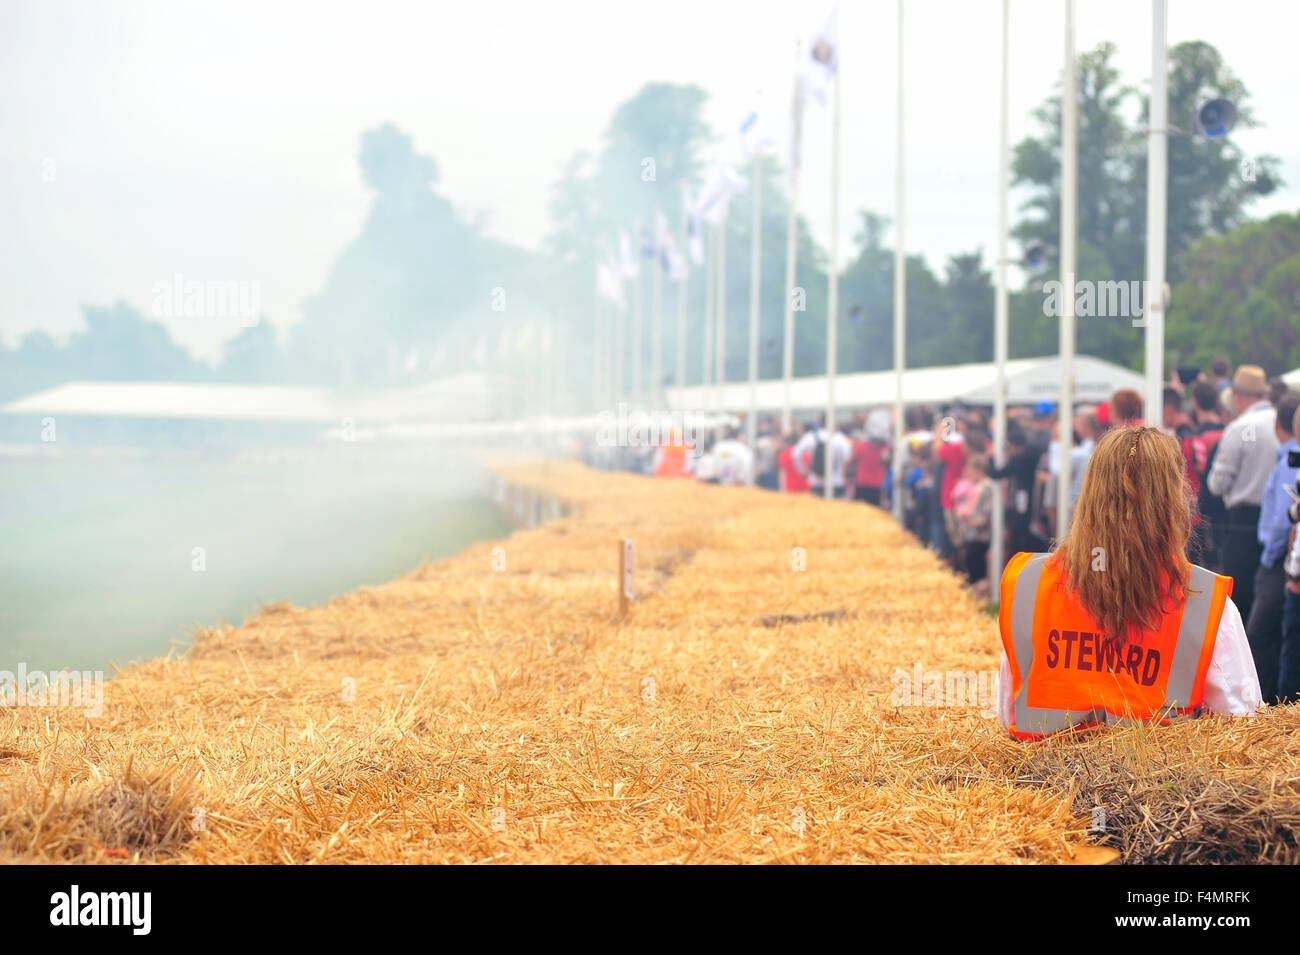 A woman in an orange Steward bib at the Goodwood Festival of Speed in the UK. Stock Photo